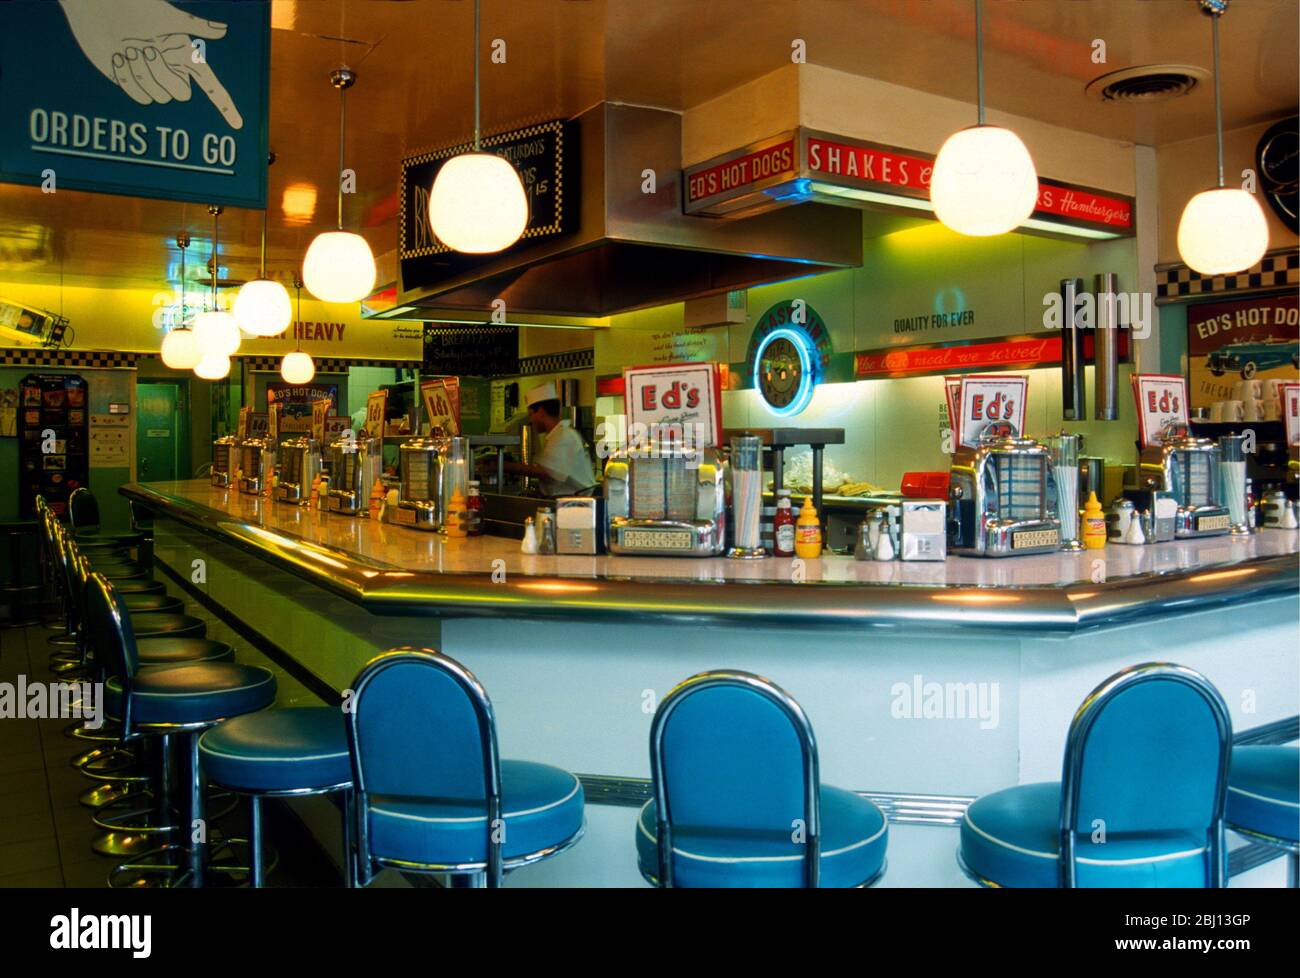 Ed's diner - view - Stock Photo